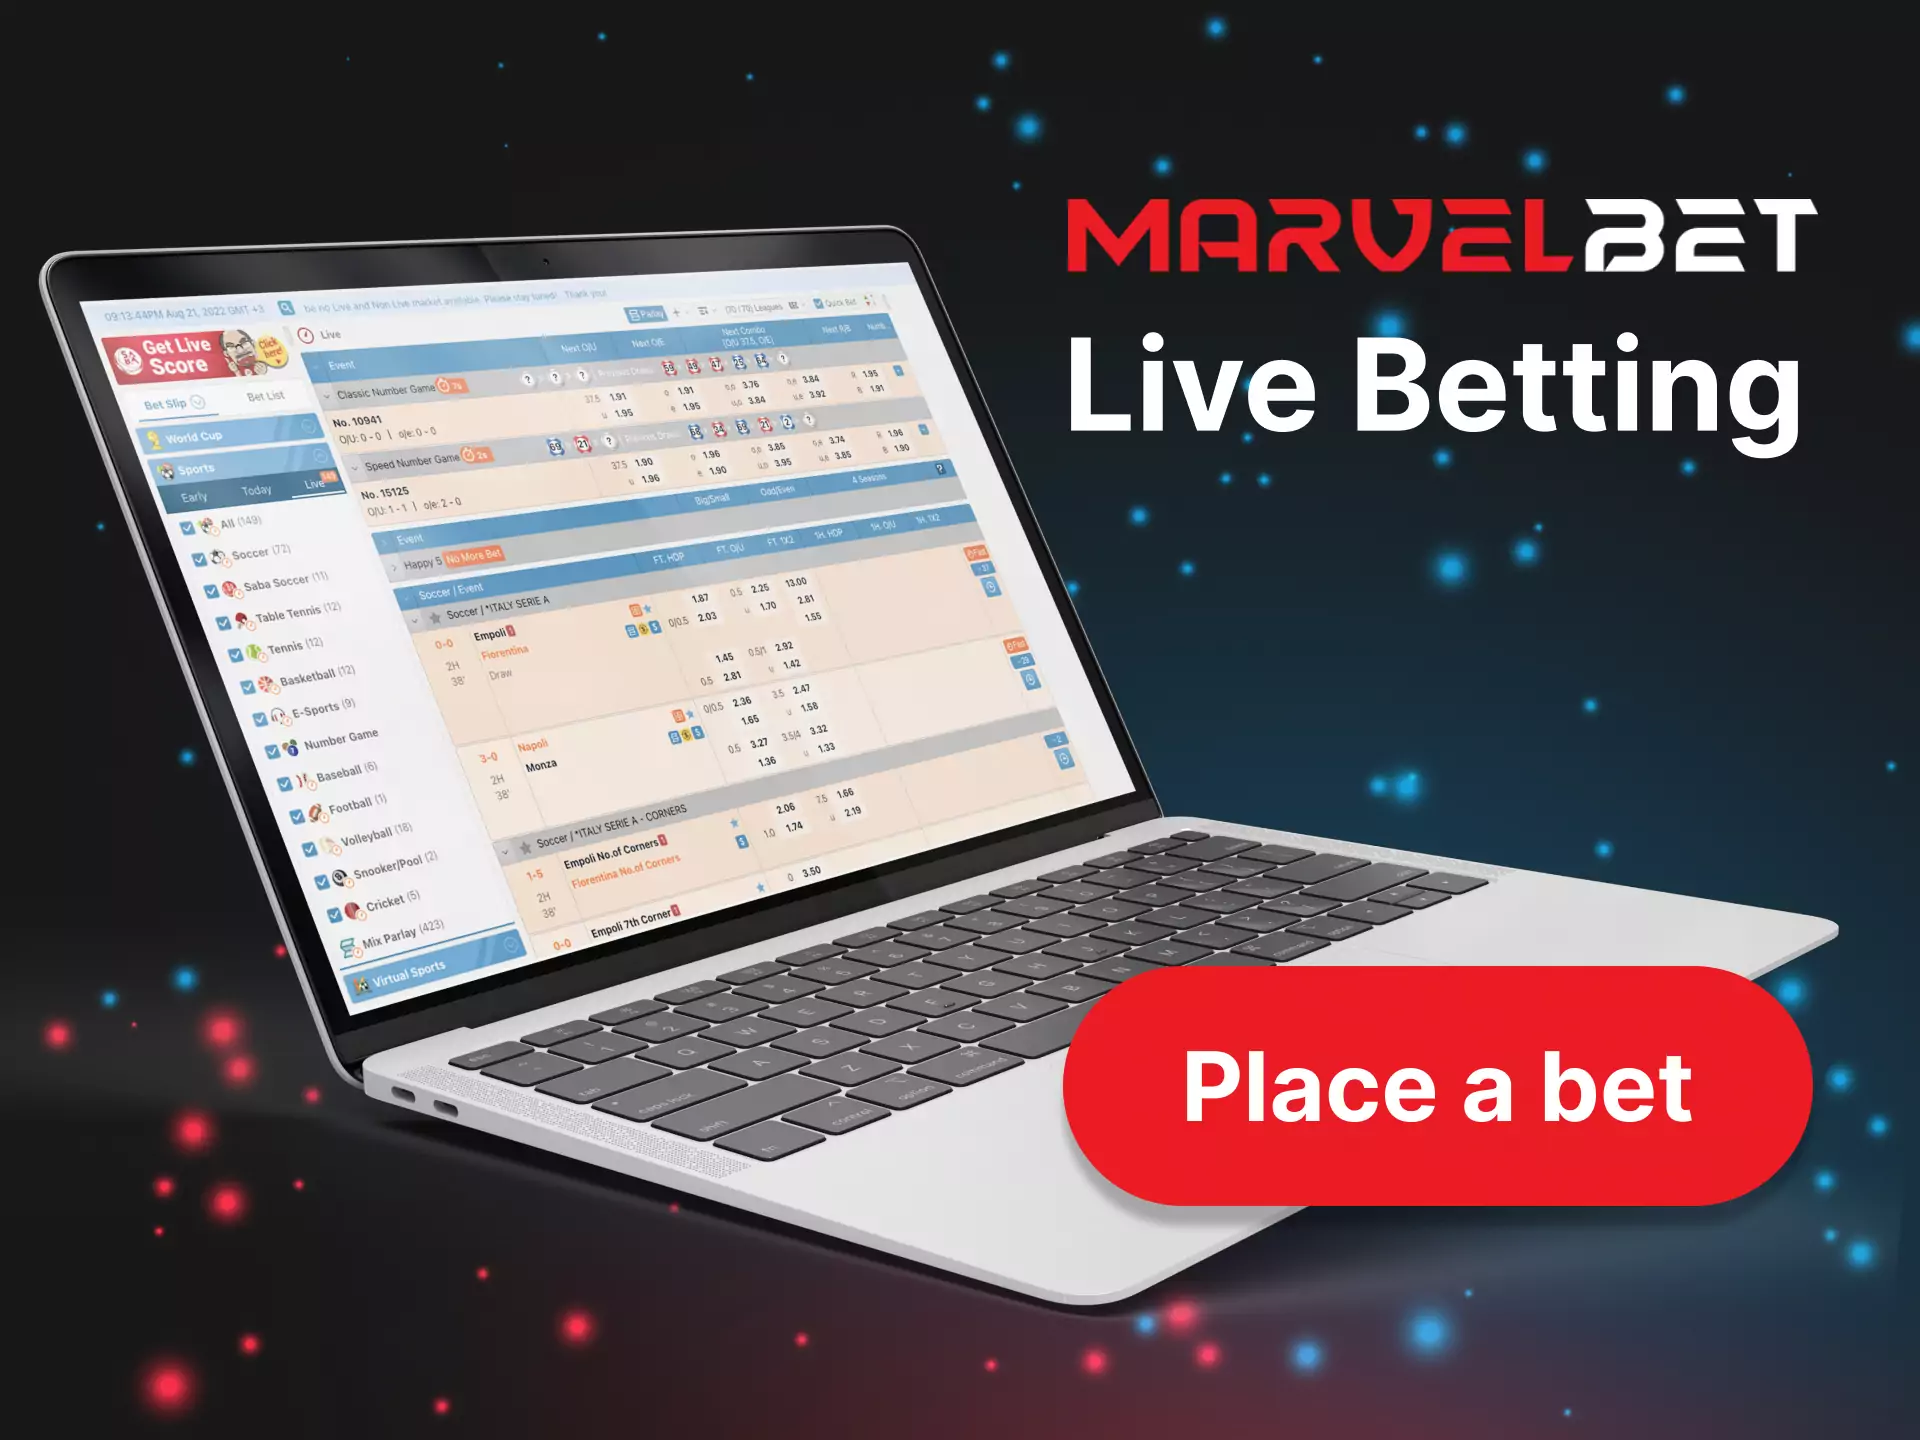 You can place bets during the match in the Marvelbet Live section.